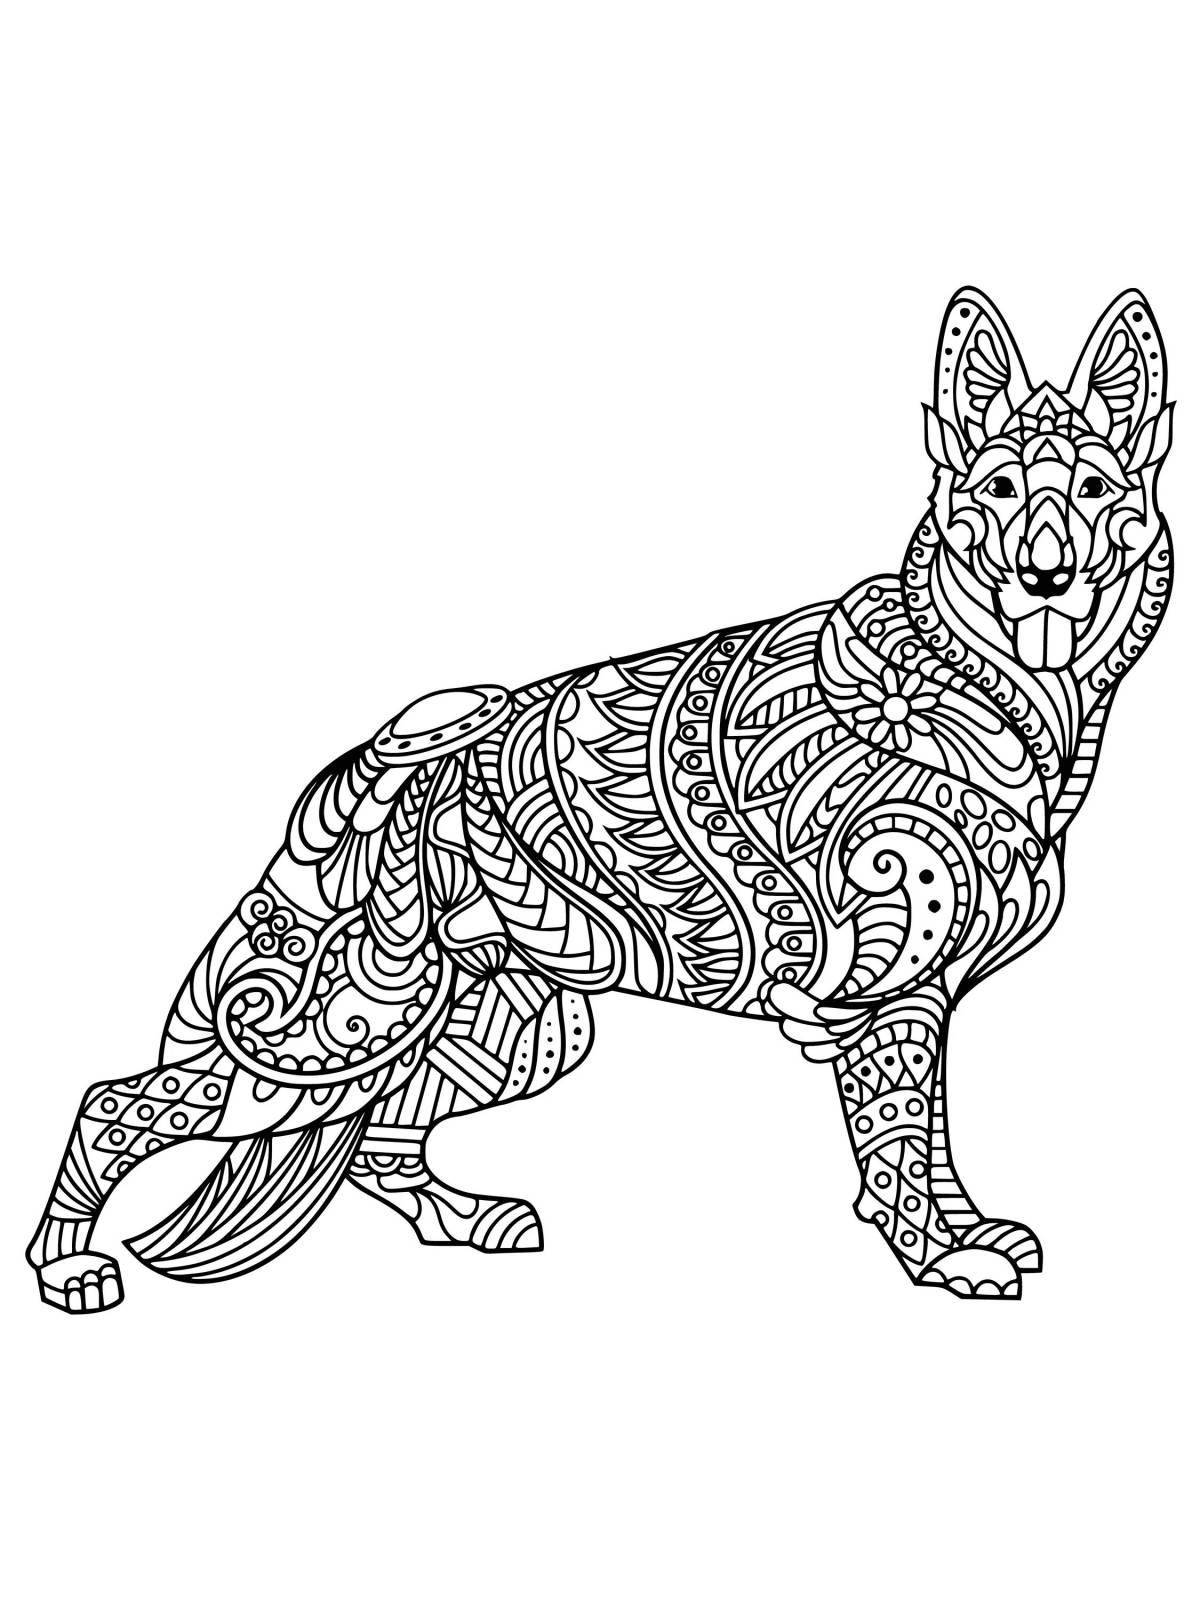 Gentle coloring pages of dogs for adults